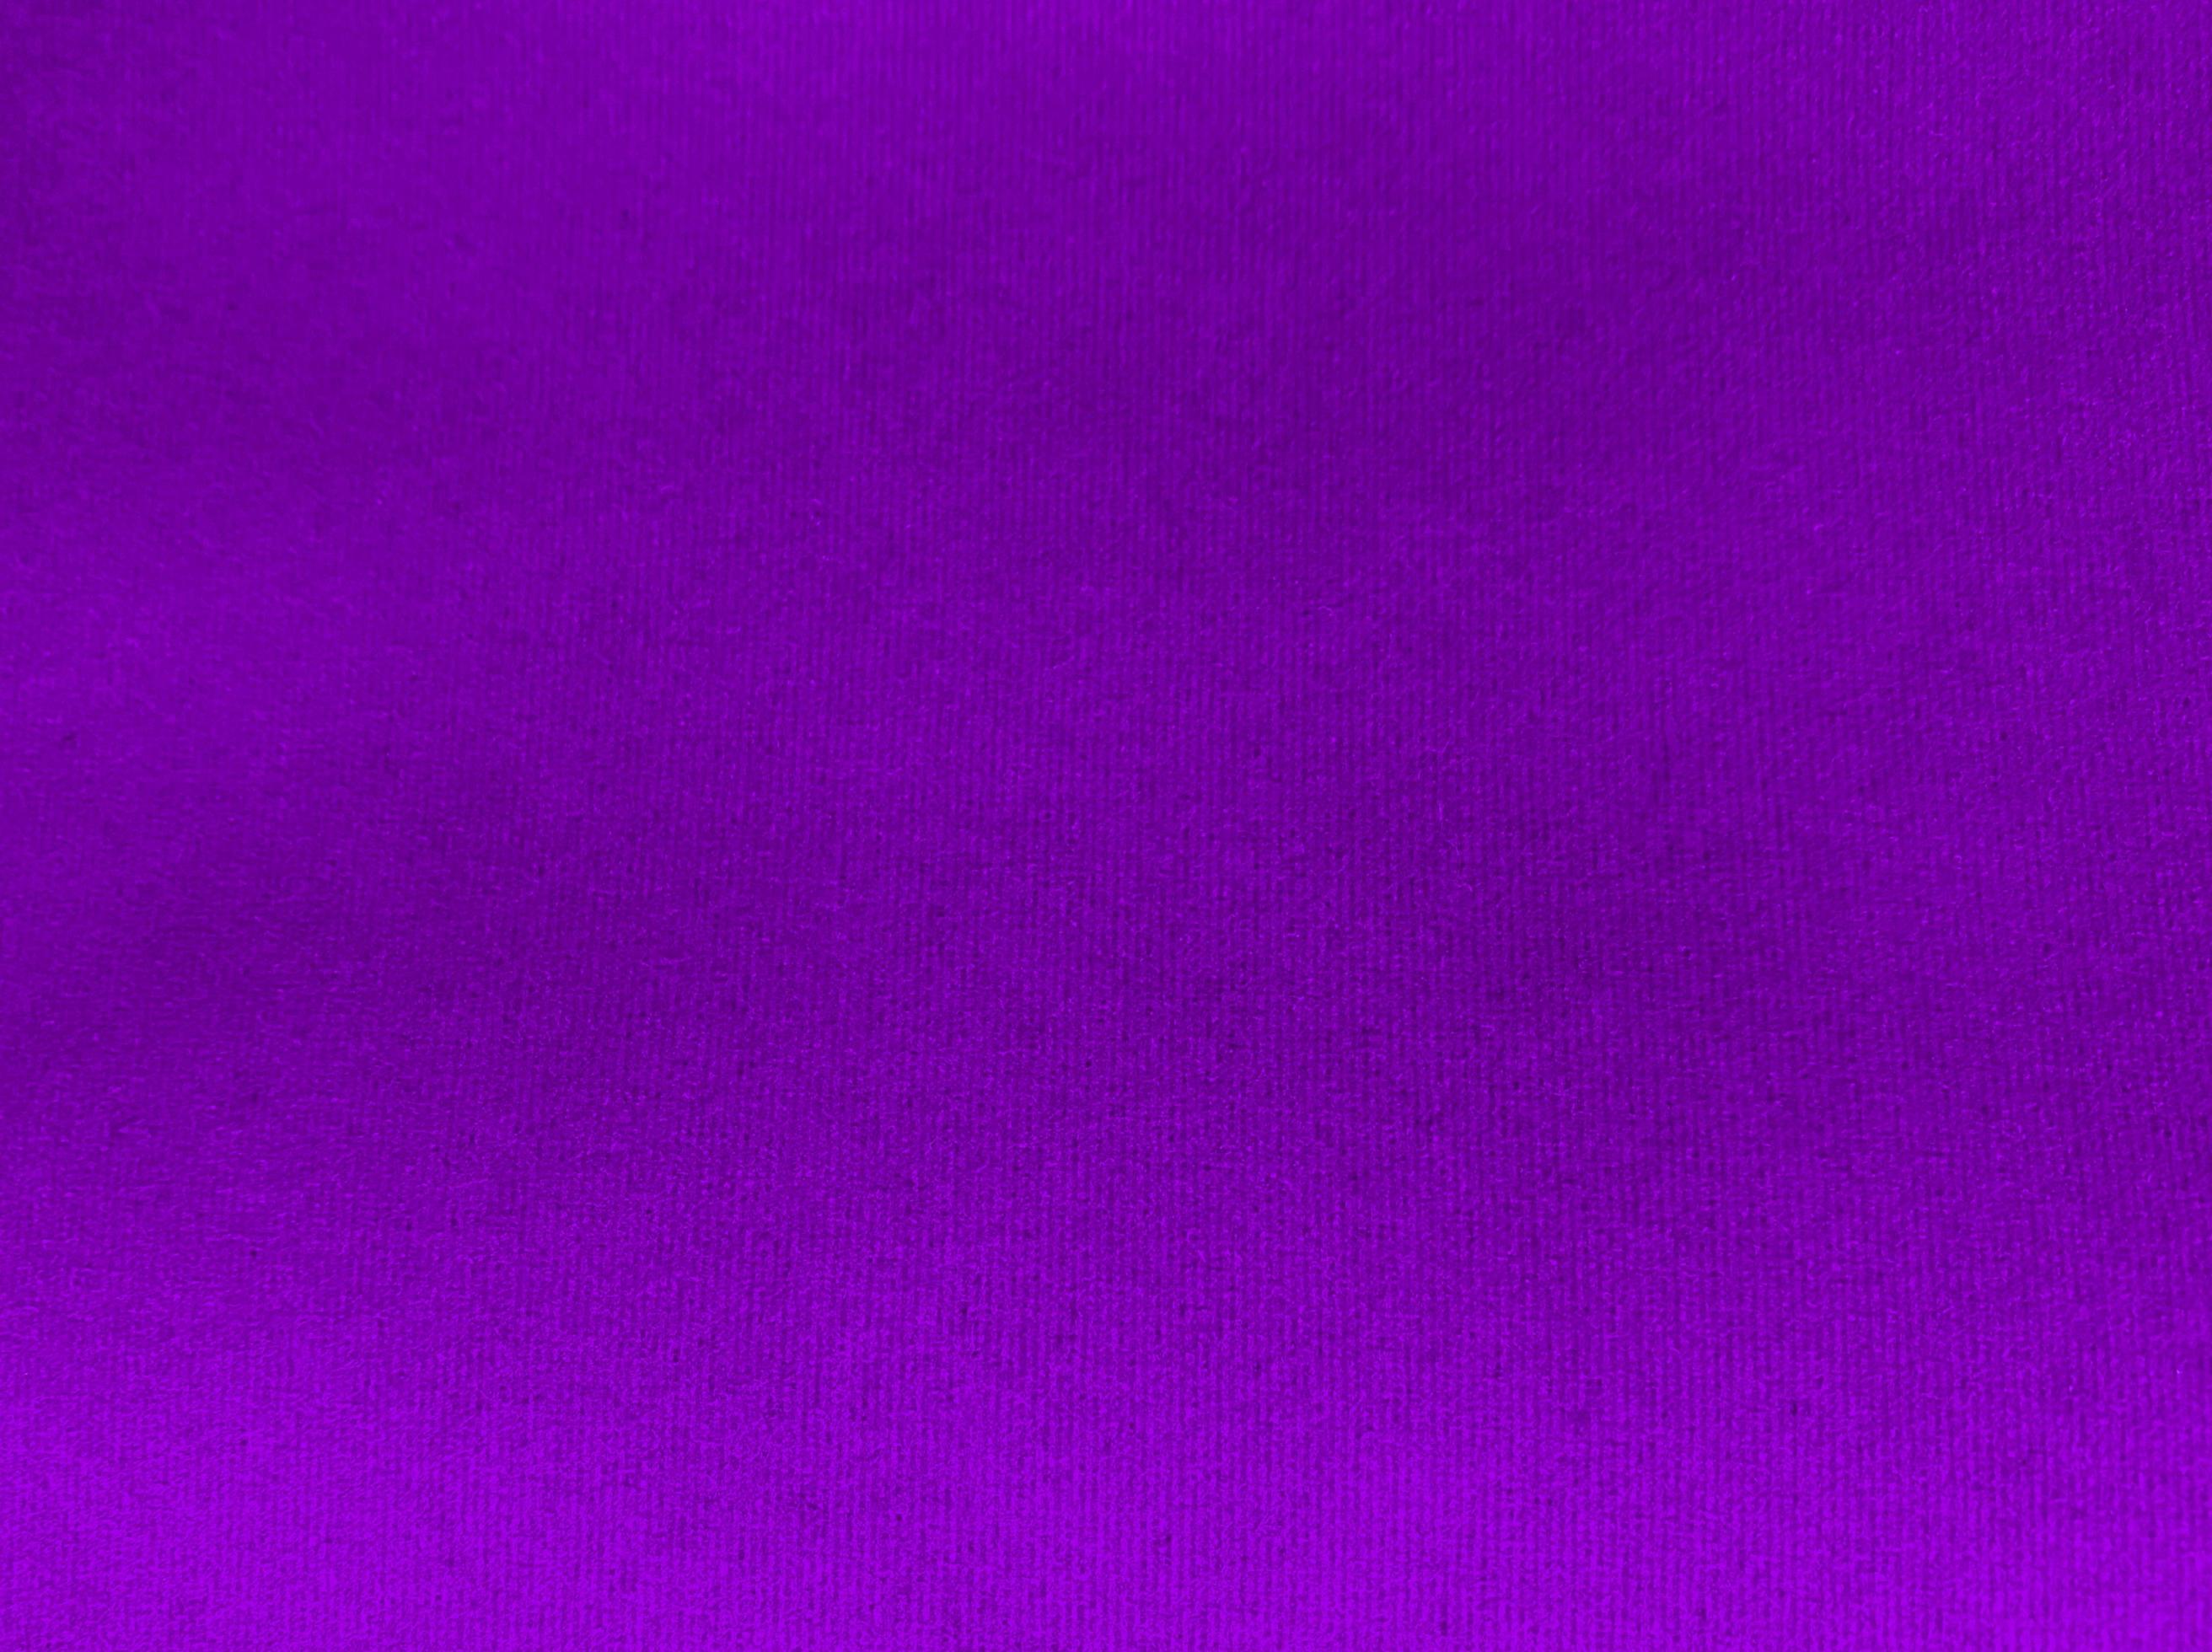 Premium Photo  Dark purple velvet fabric texture used as background empty  dark purple blue fabric background of soft and smooth textile material  there is space for textx9